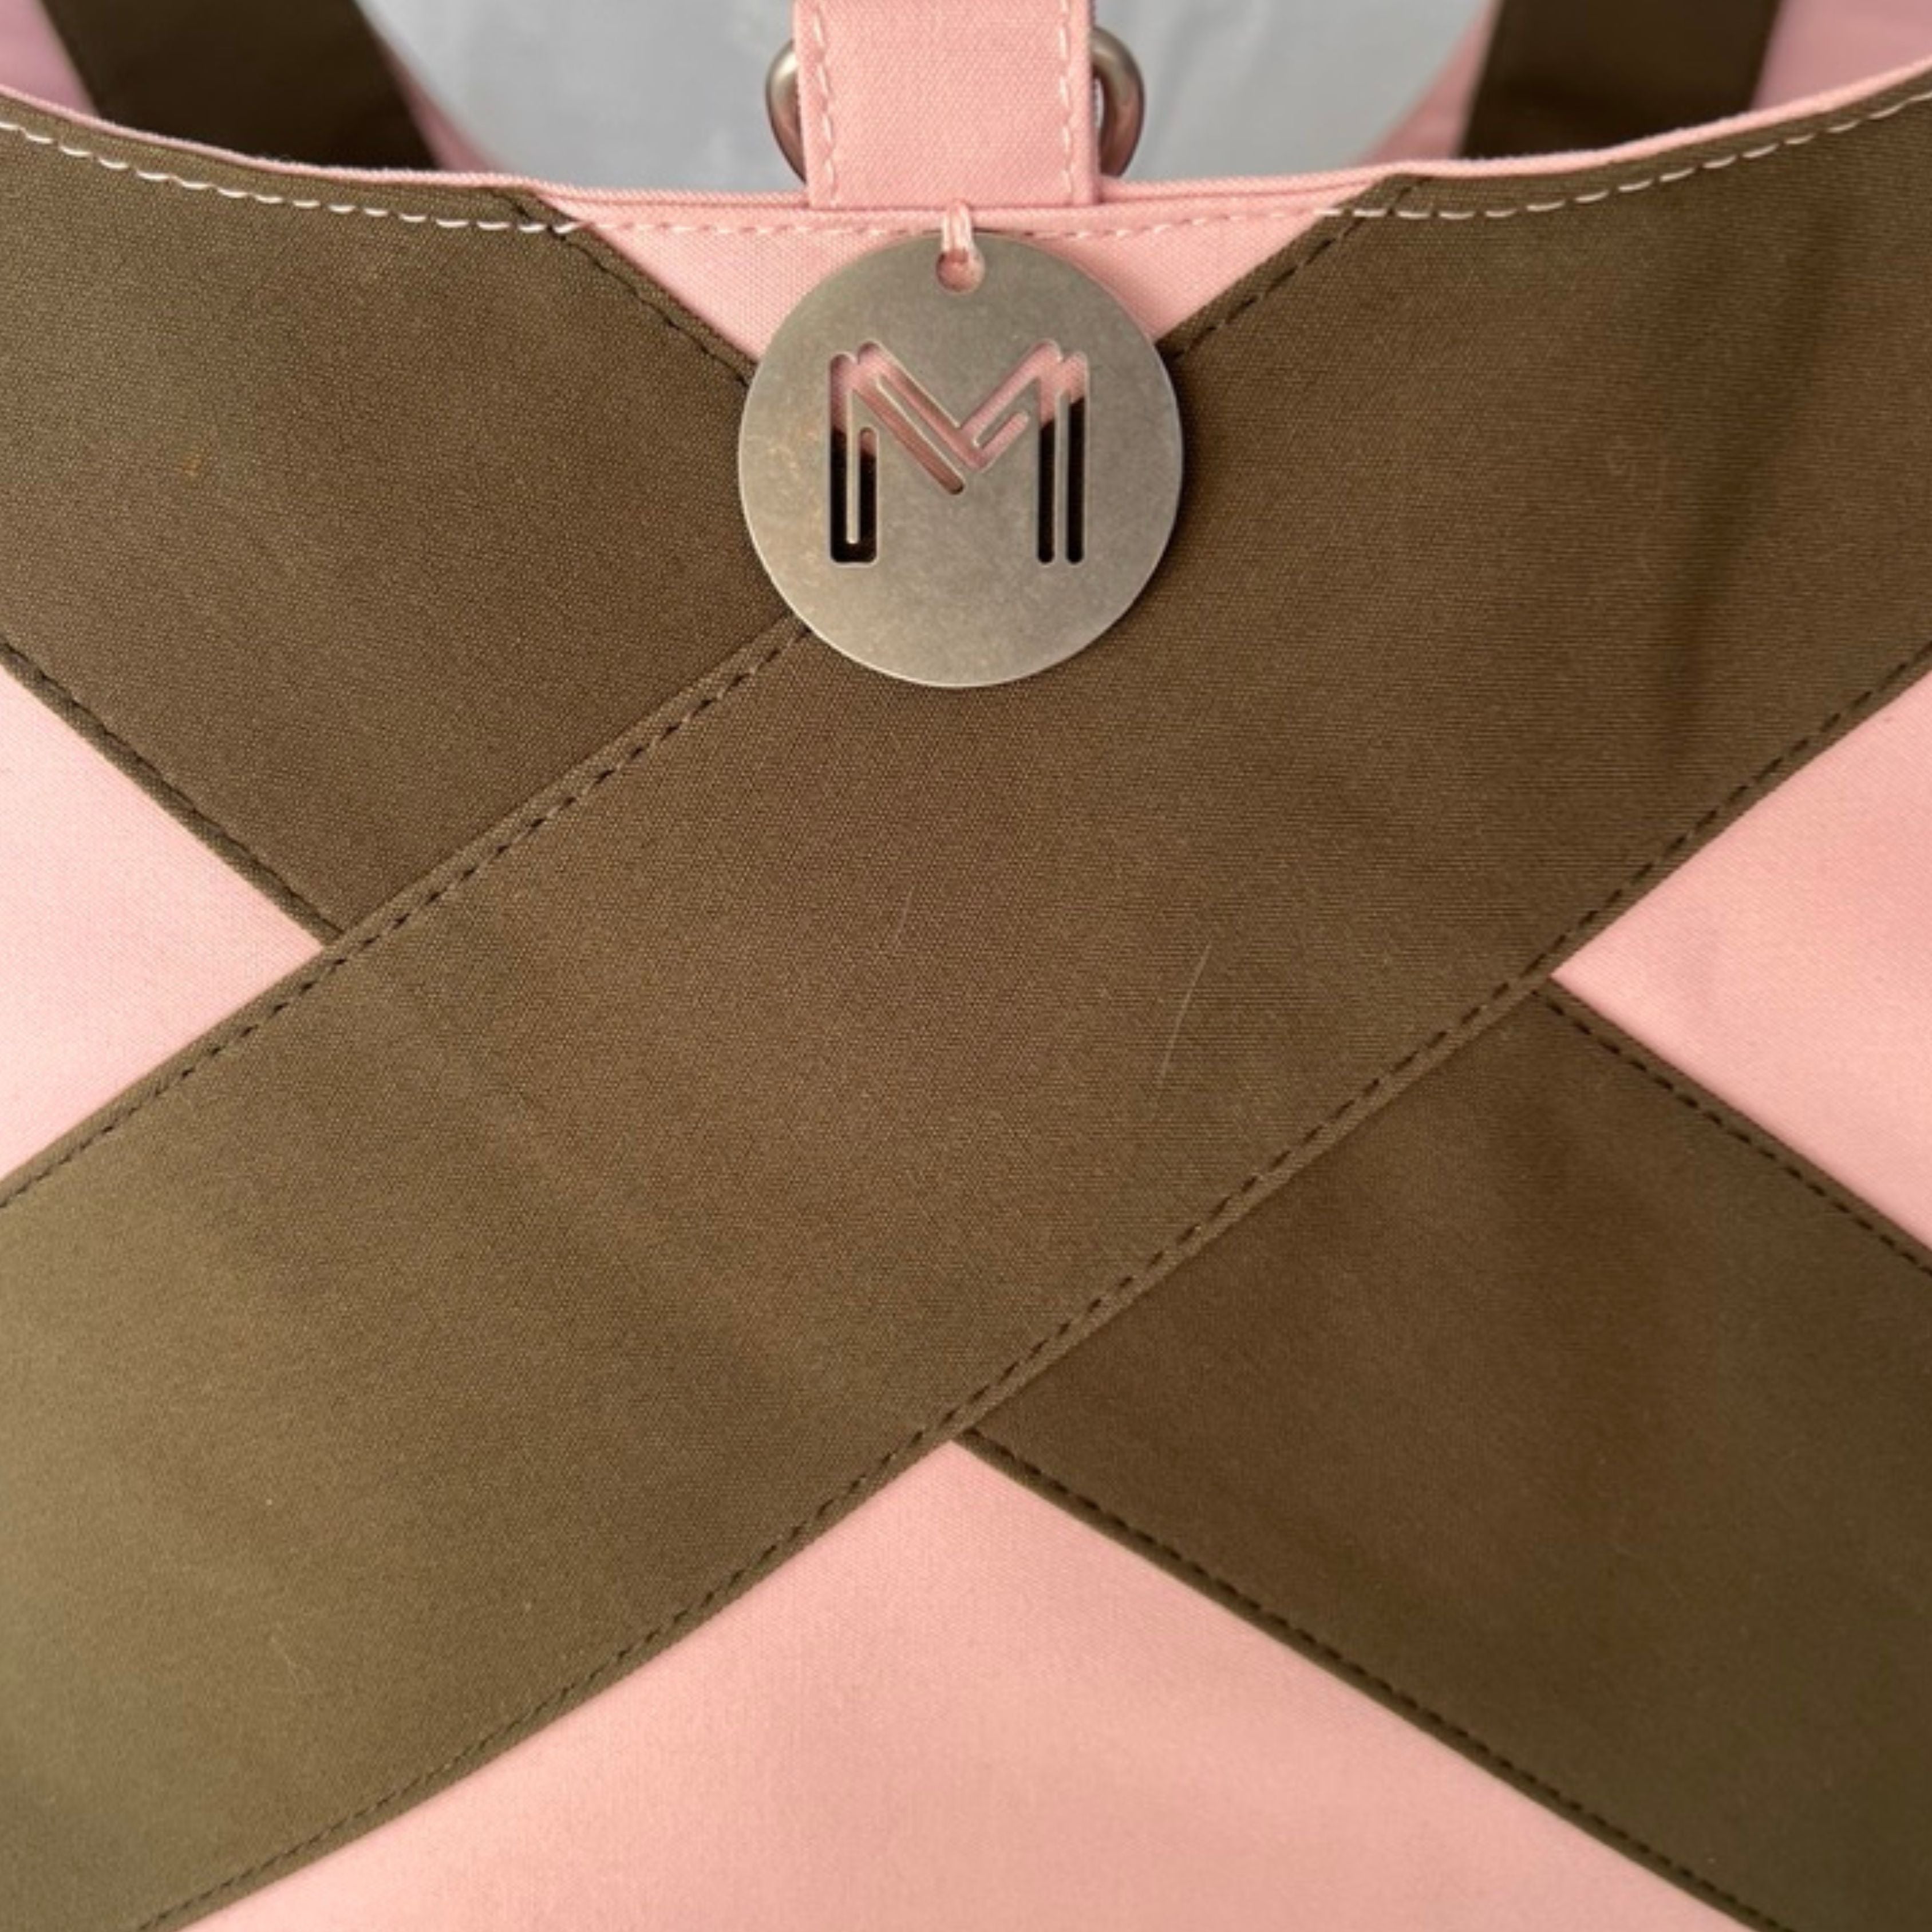 Cove Carry-All - Pastel Pink with Khaki Cross (Limited Edition)